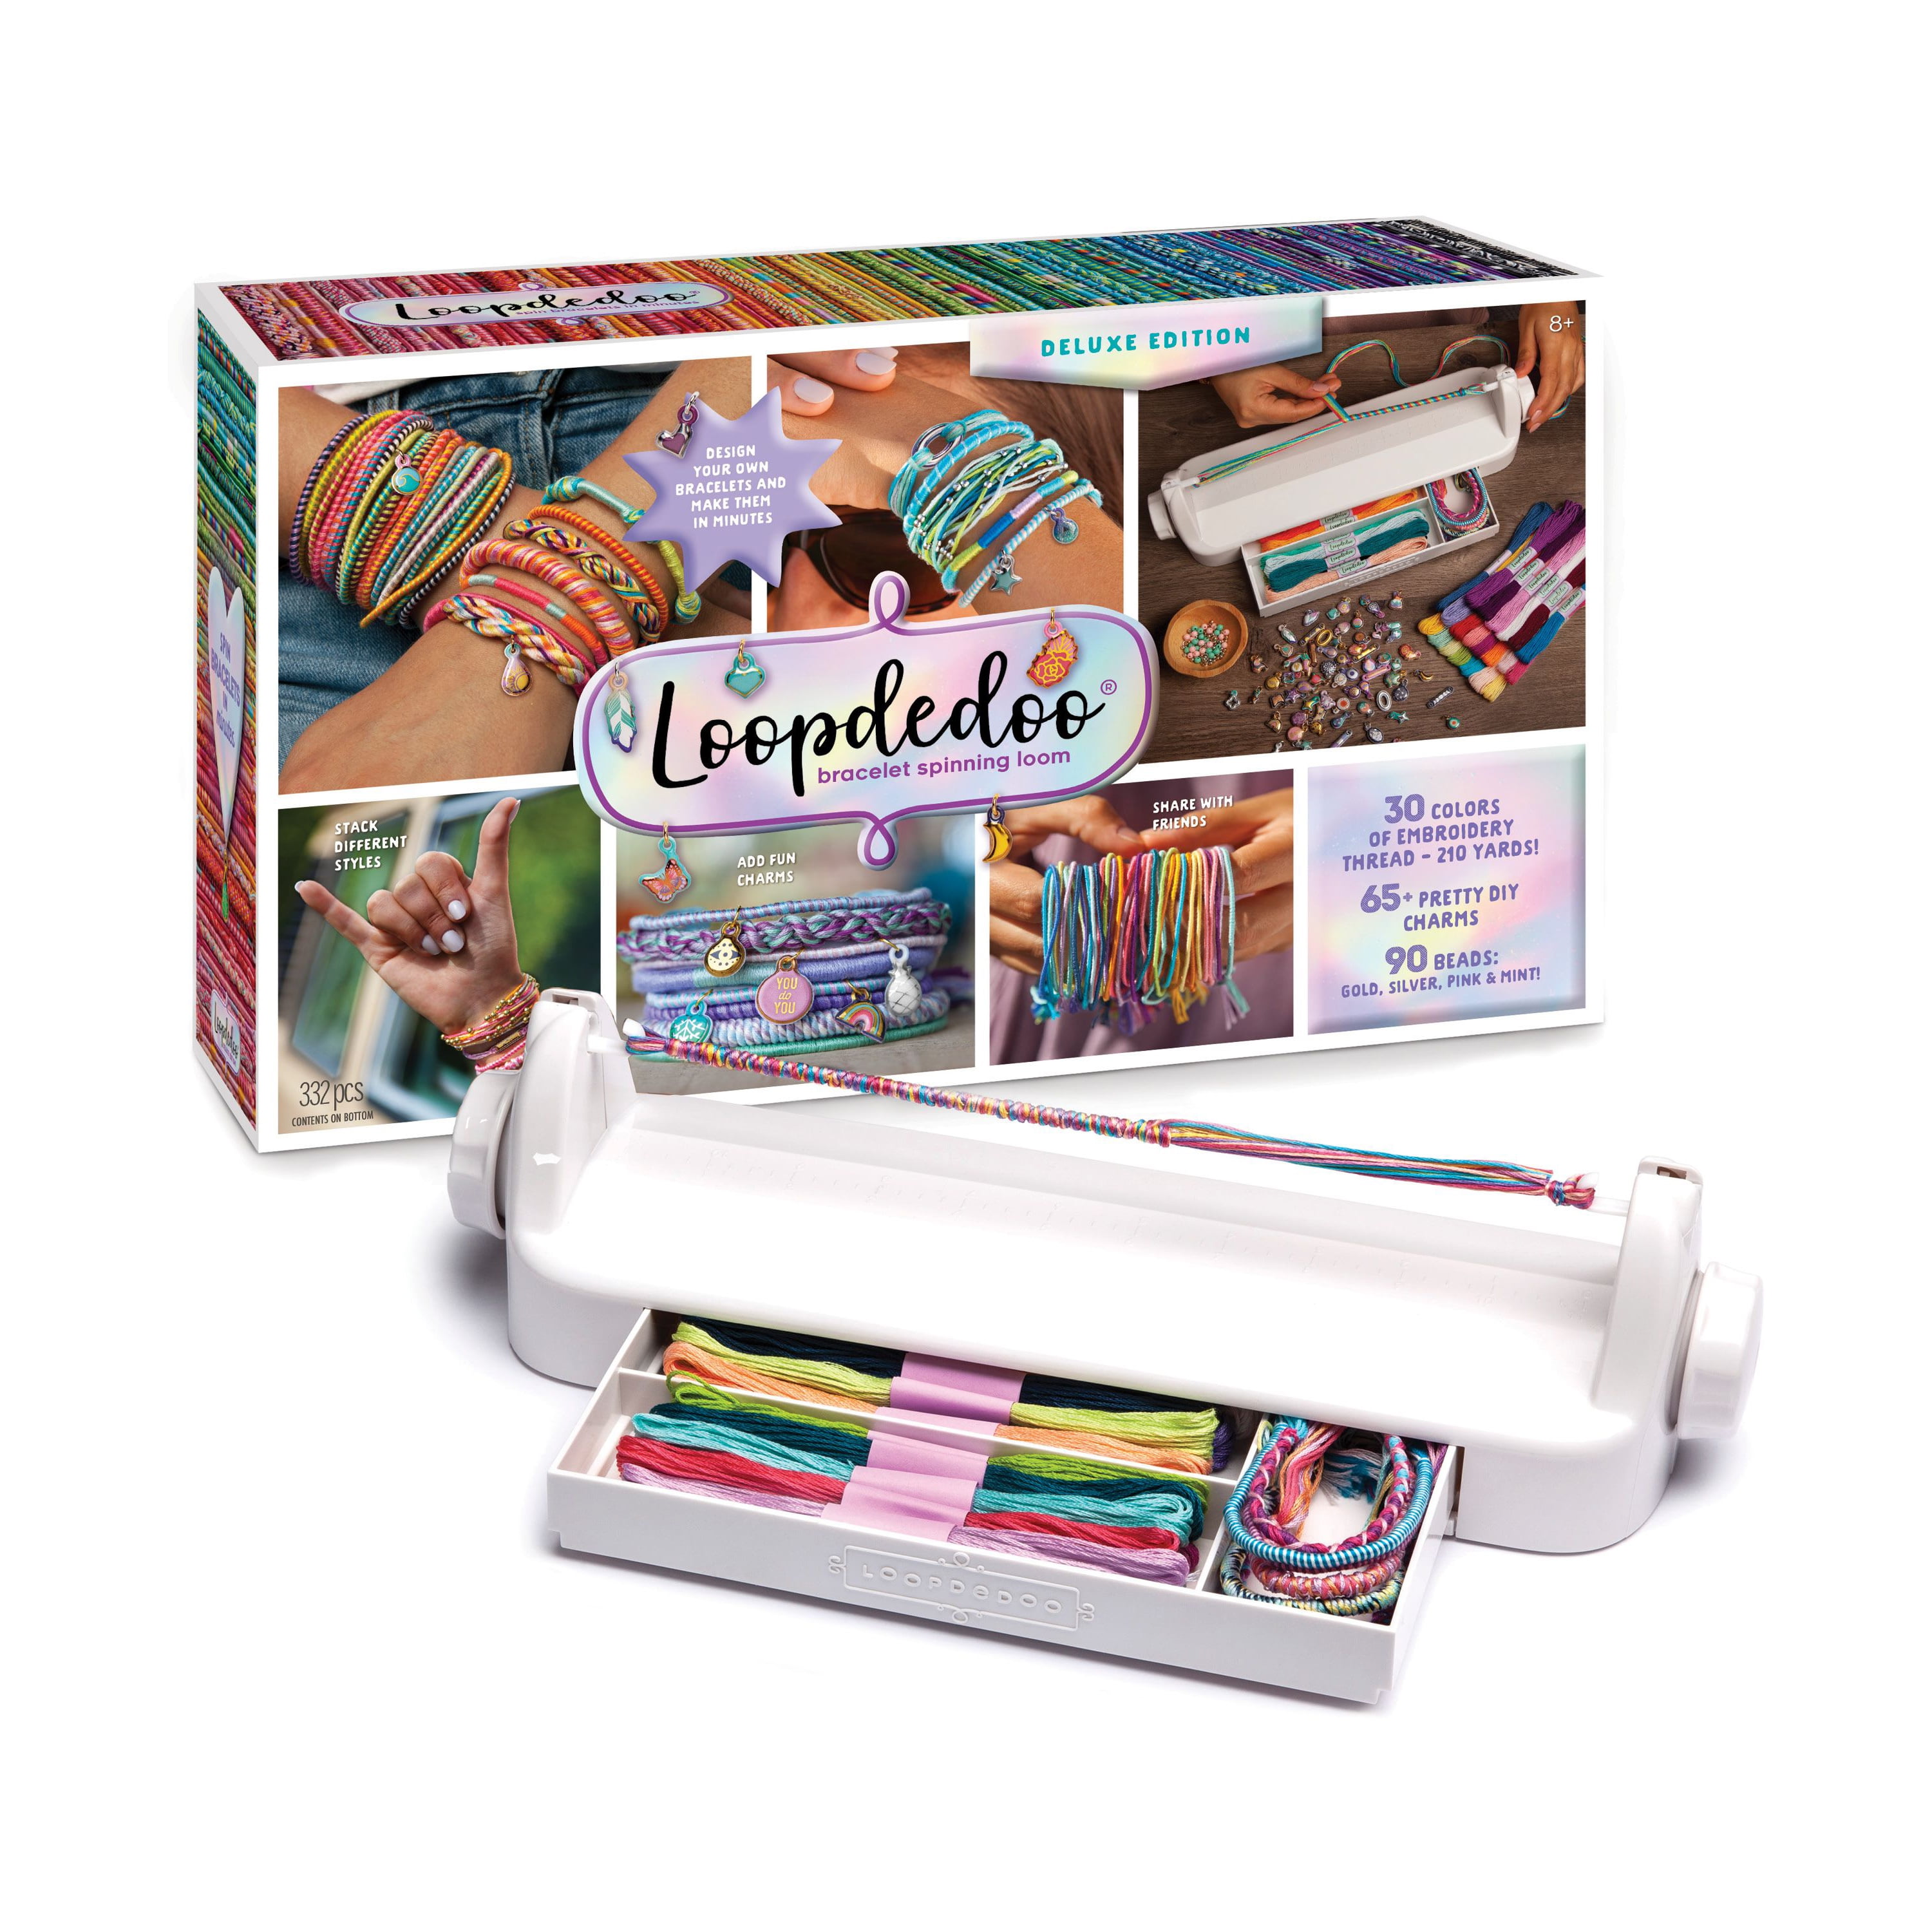 Made by Me Easy Steps Weaving Loom Activity Kt, Includes 165 Colorful Craft  Loops